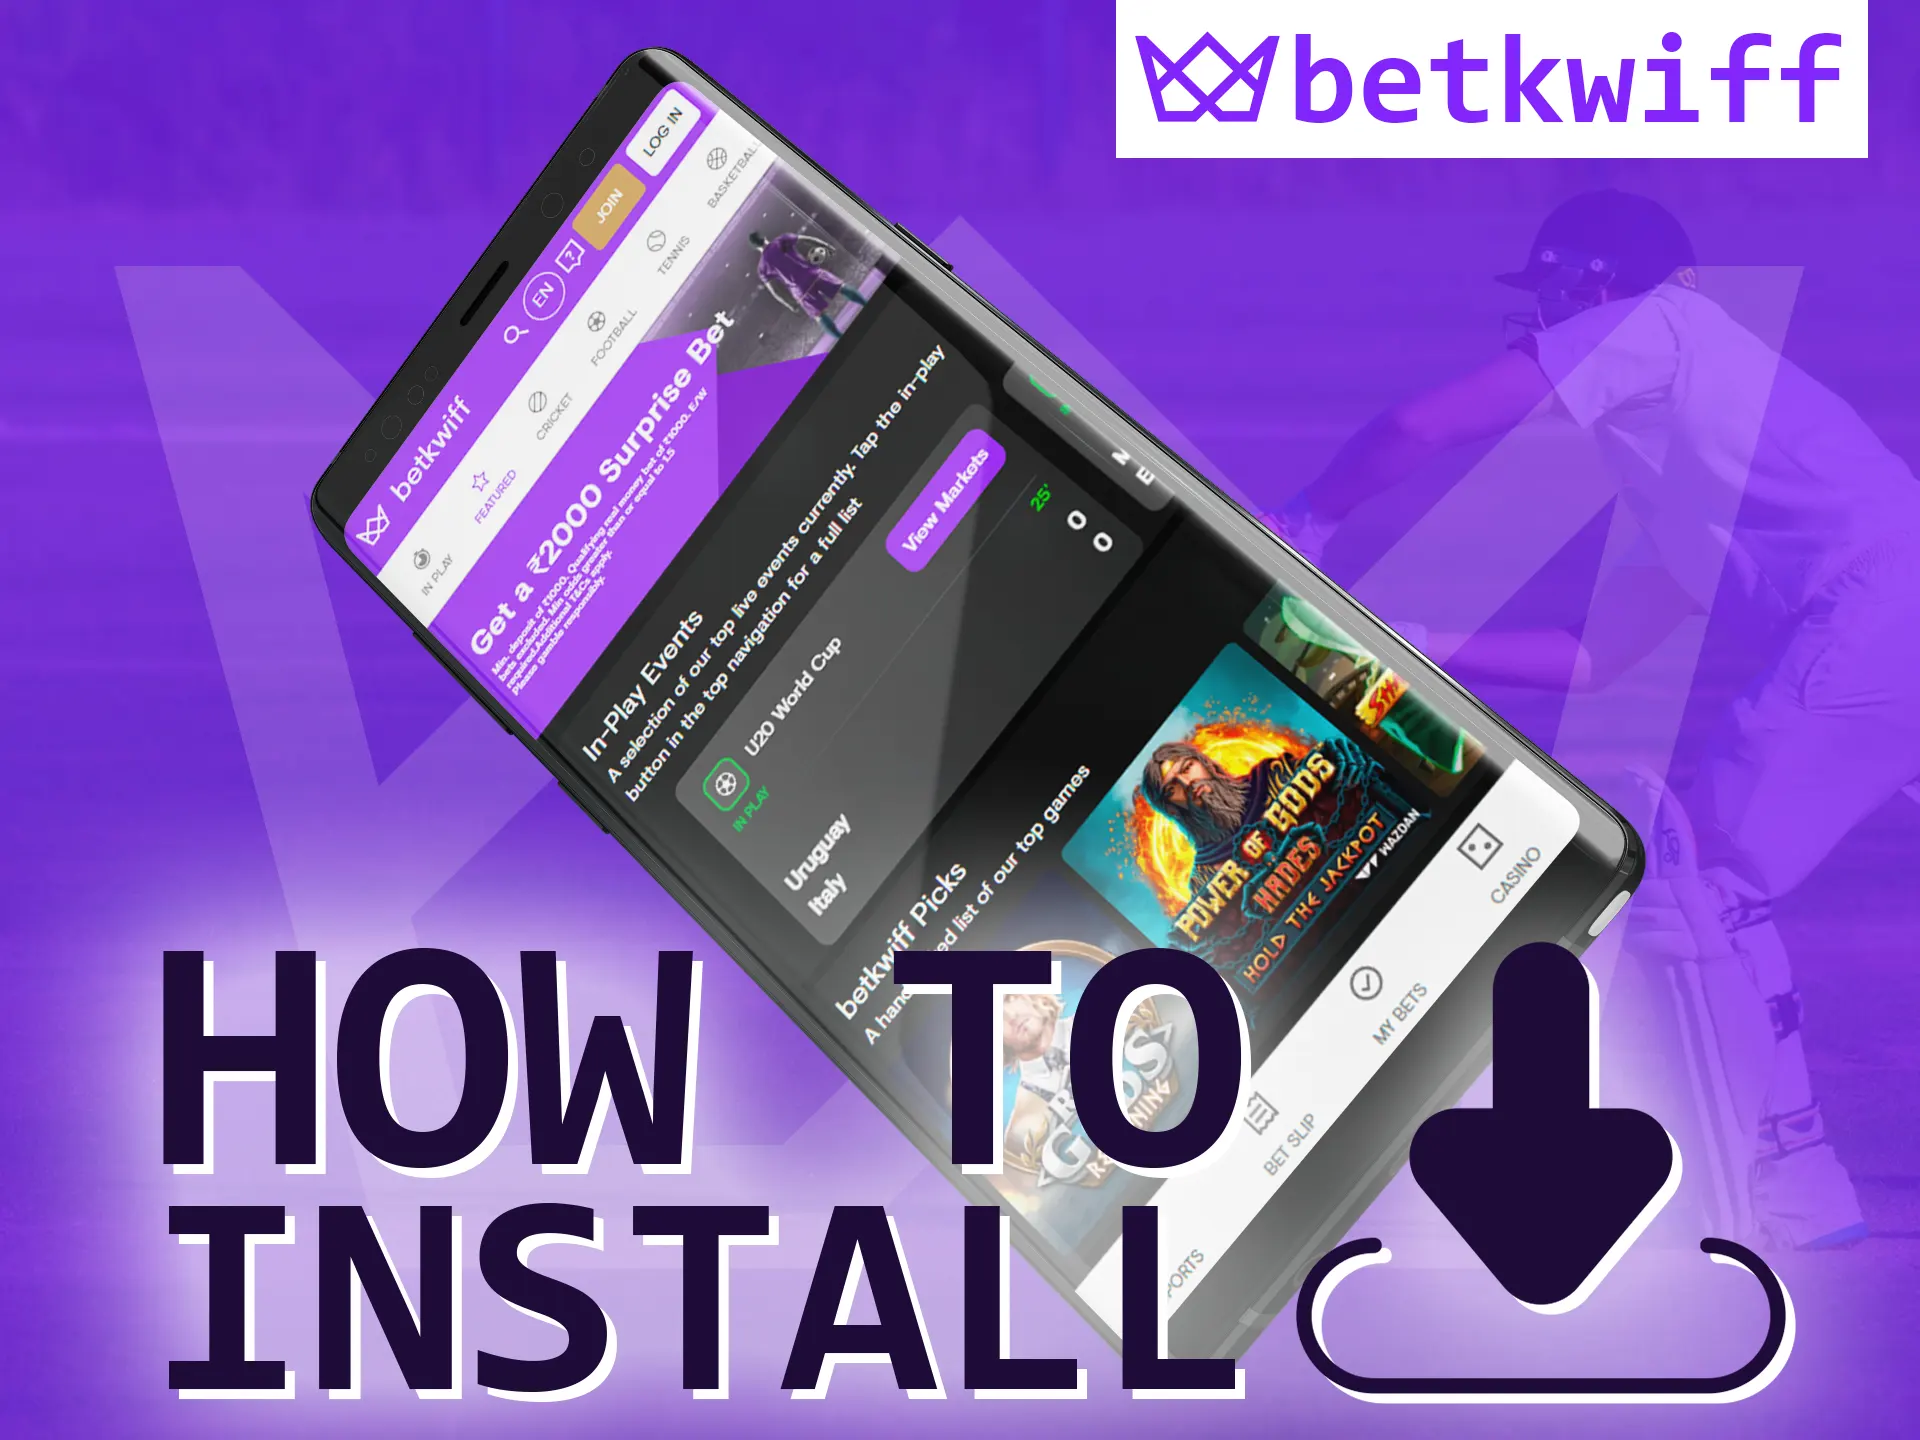 With these instructions, it's easy to install the Betkwiff app.